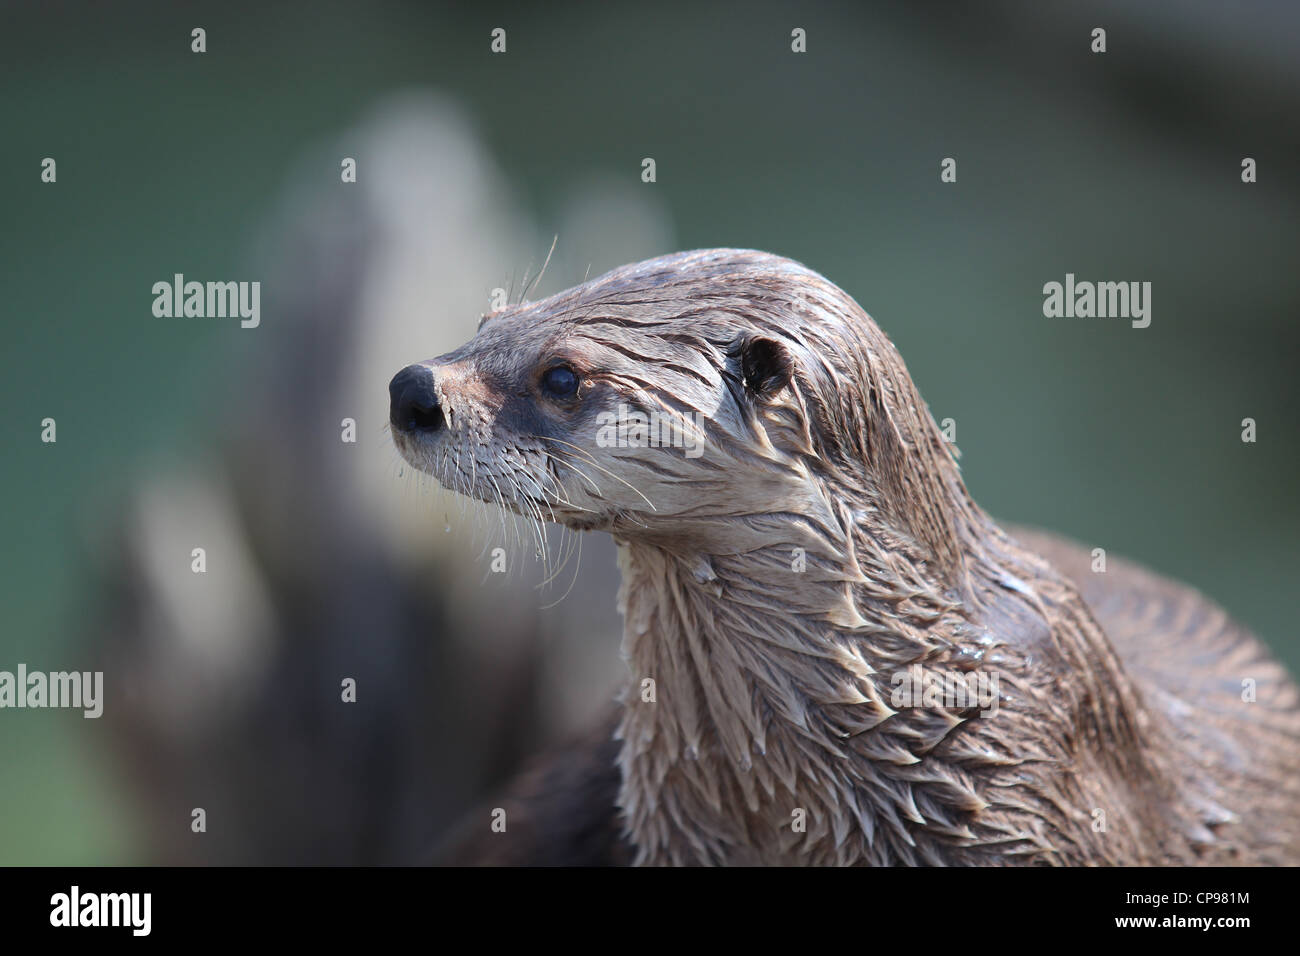 Northern River Otter close up portrait Stock Photo